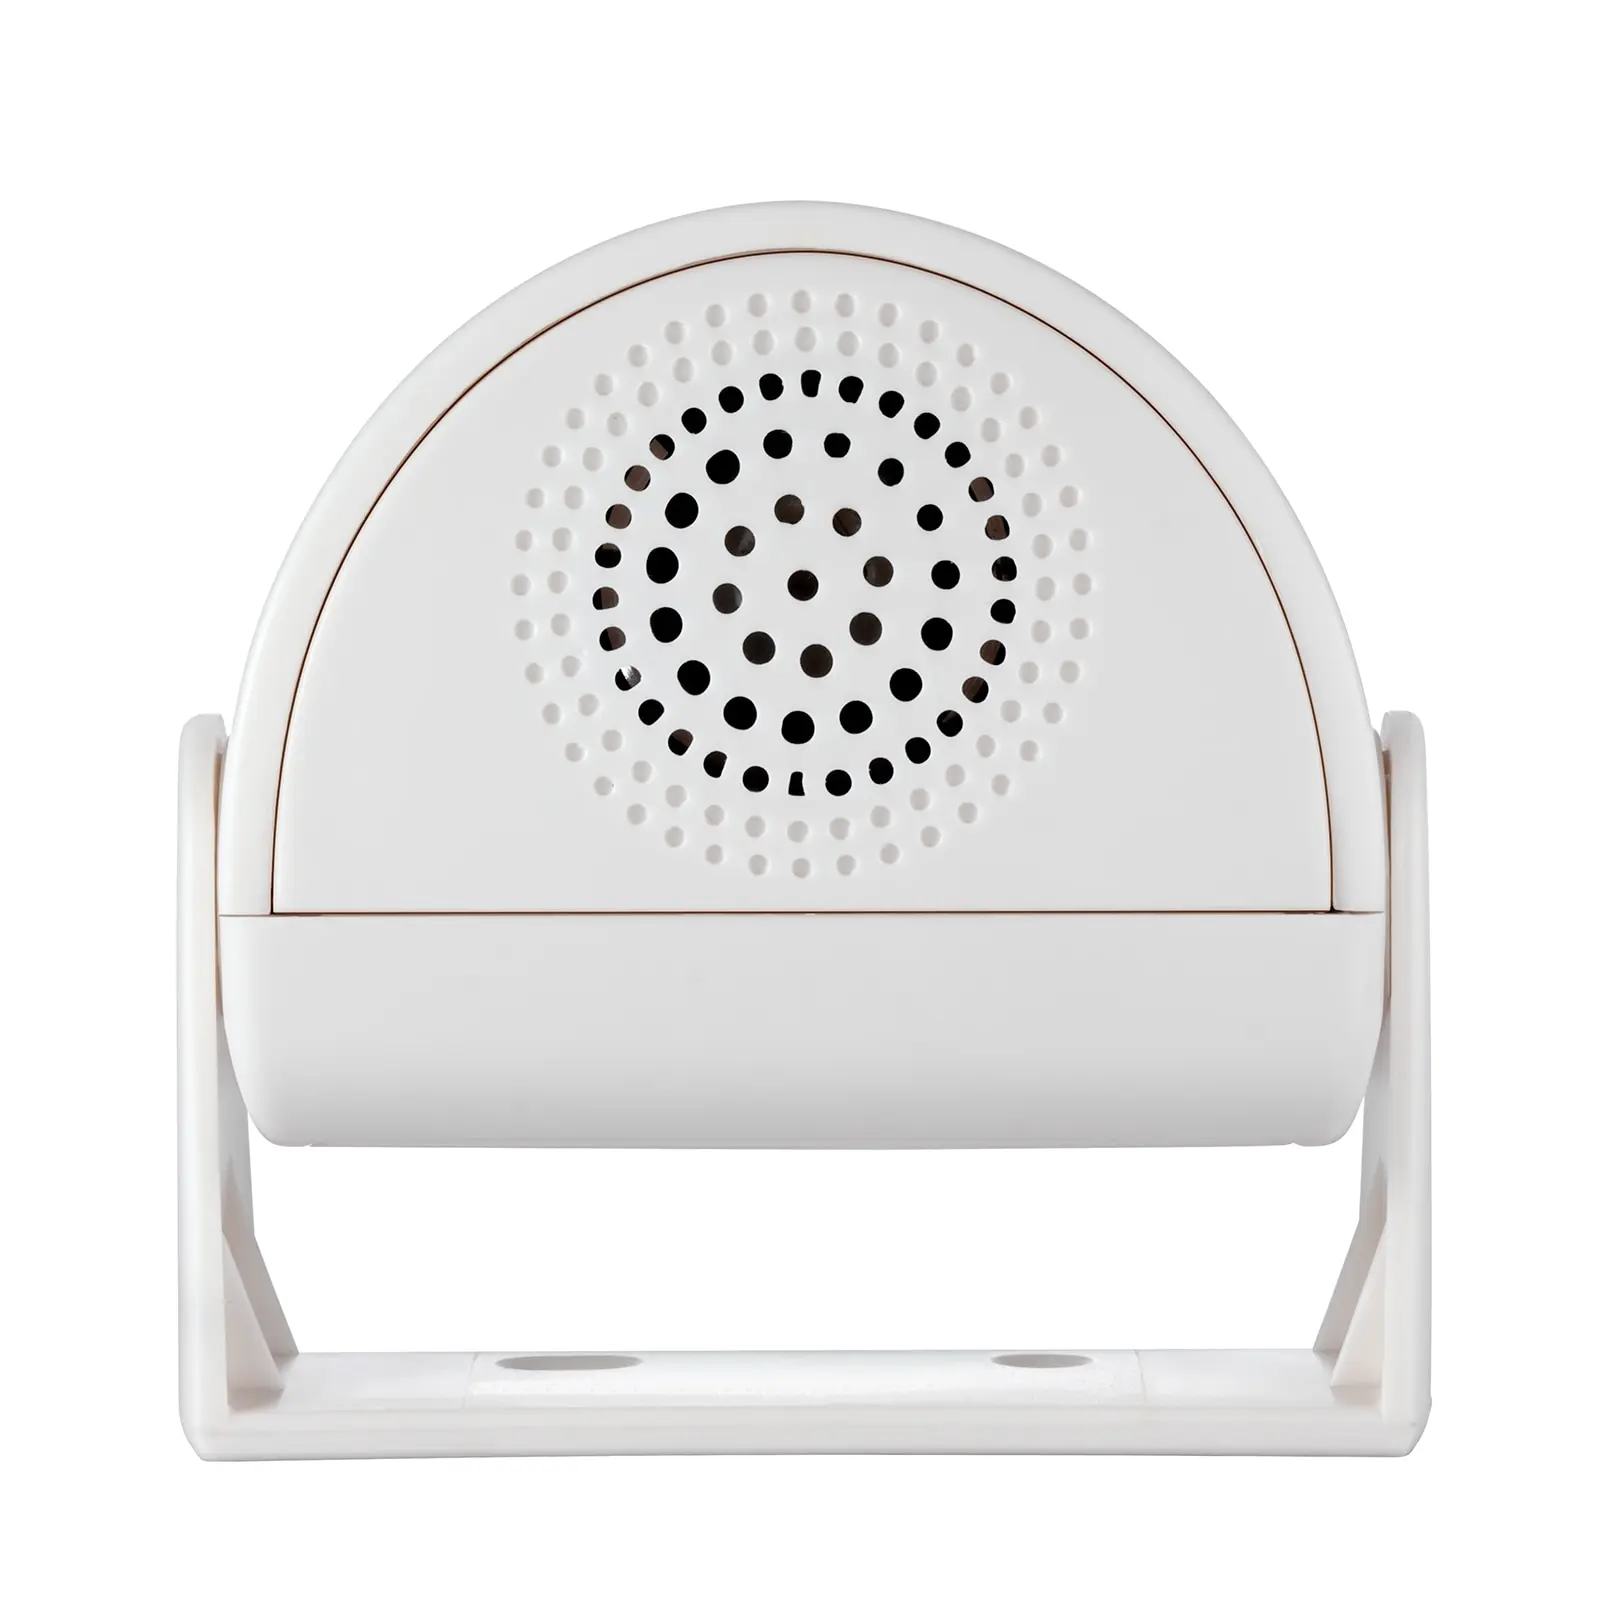 Fuers wireless guest welcome chime alarm doorbell with pir motion sensor € 18,06